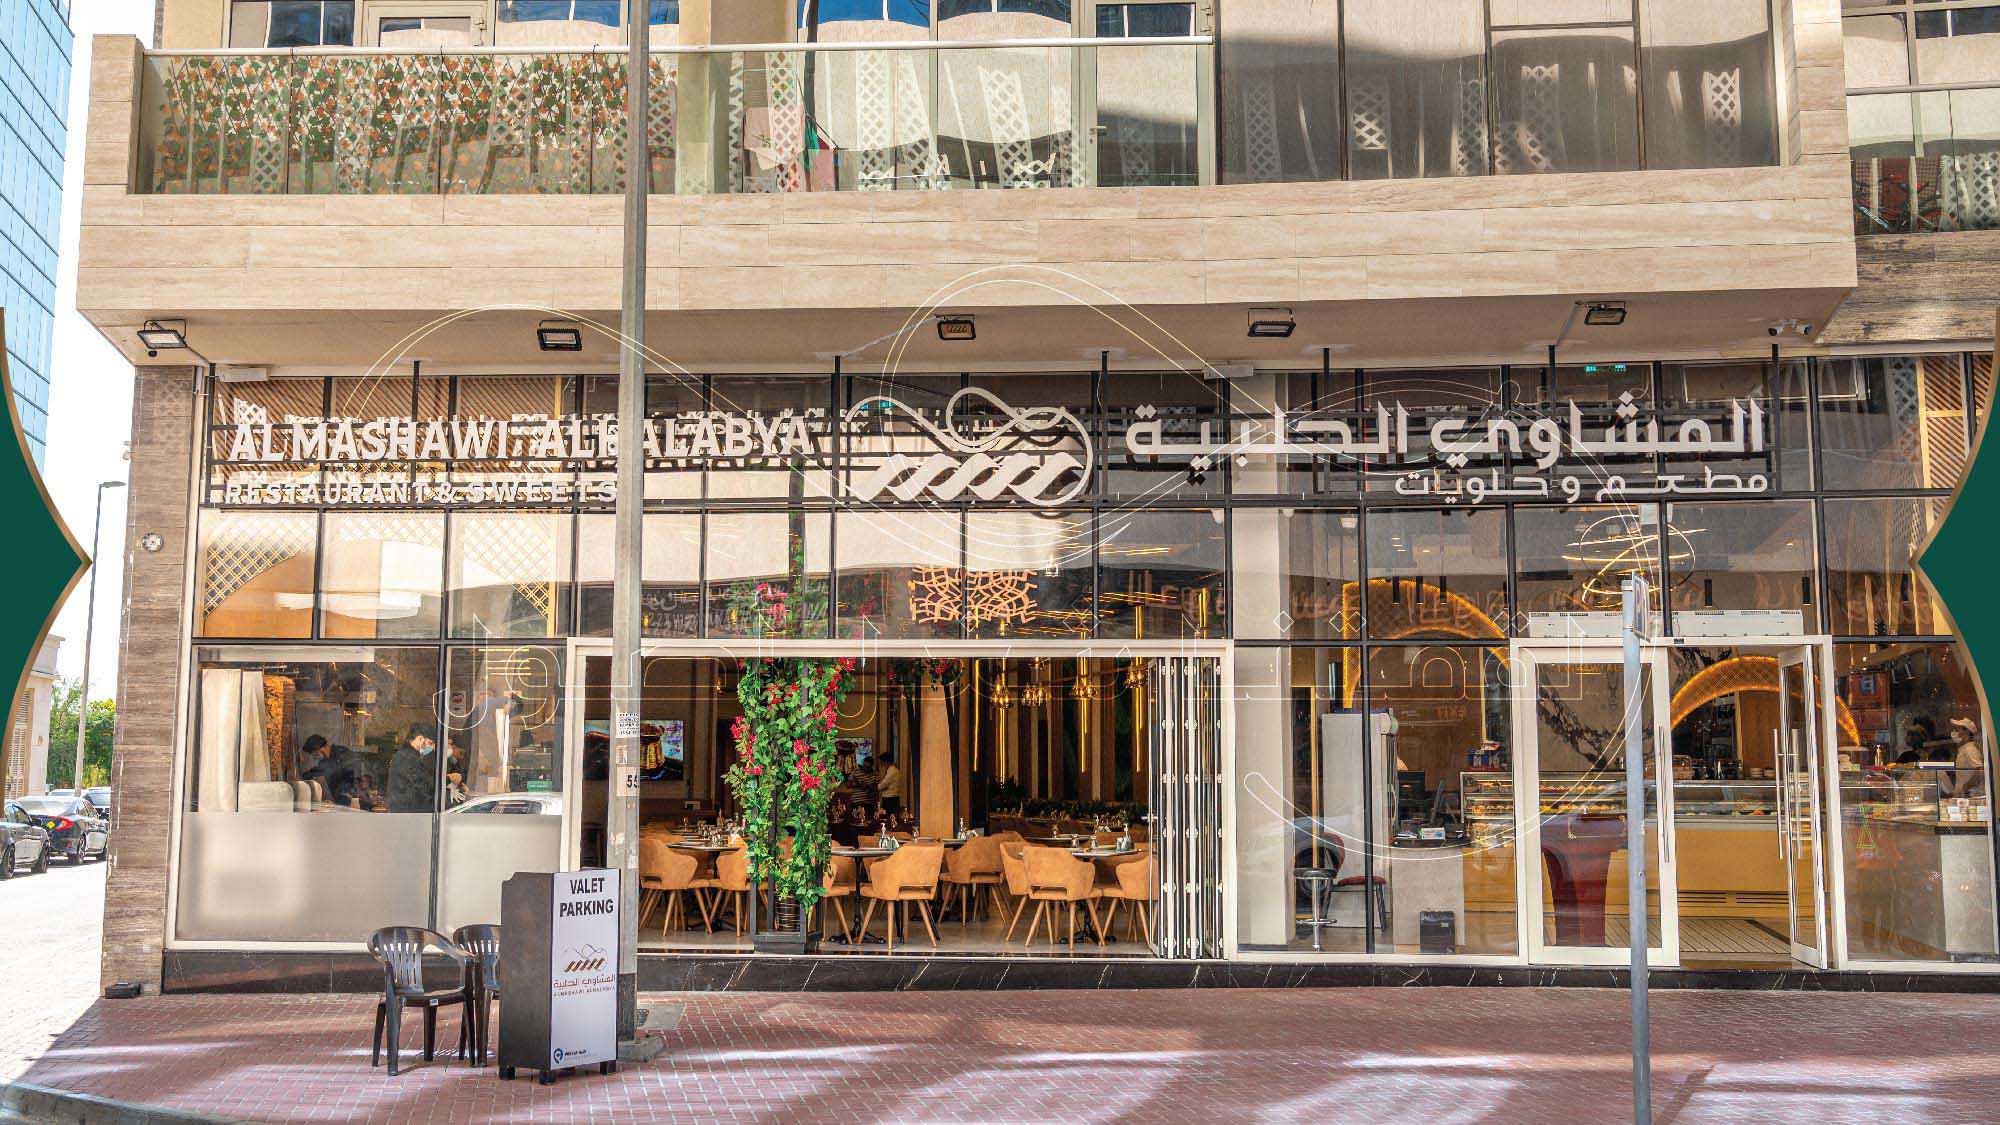 Why Al Halabya Restaurant is the Go-To for Halabi and Syrian Cuisine ​